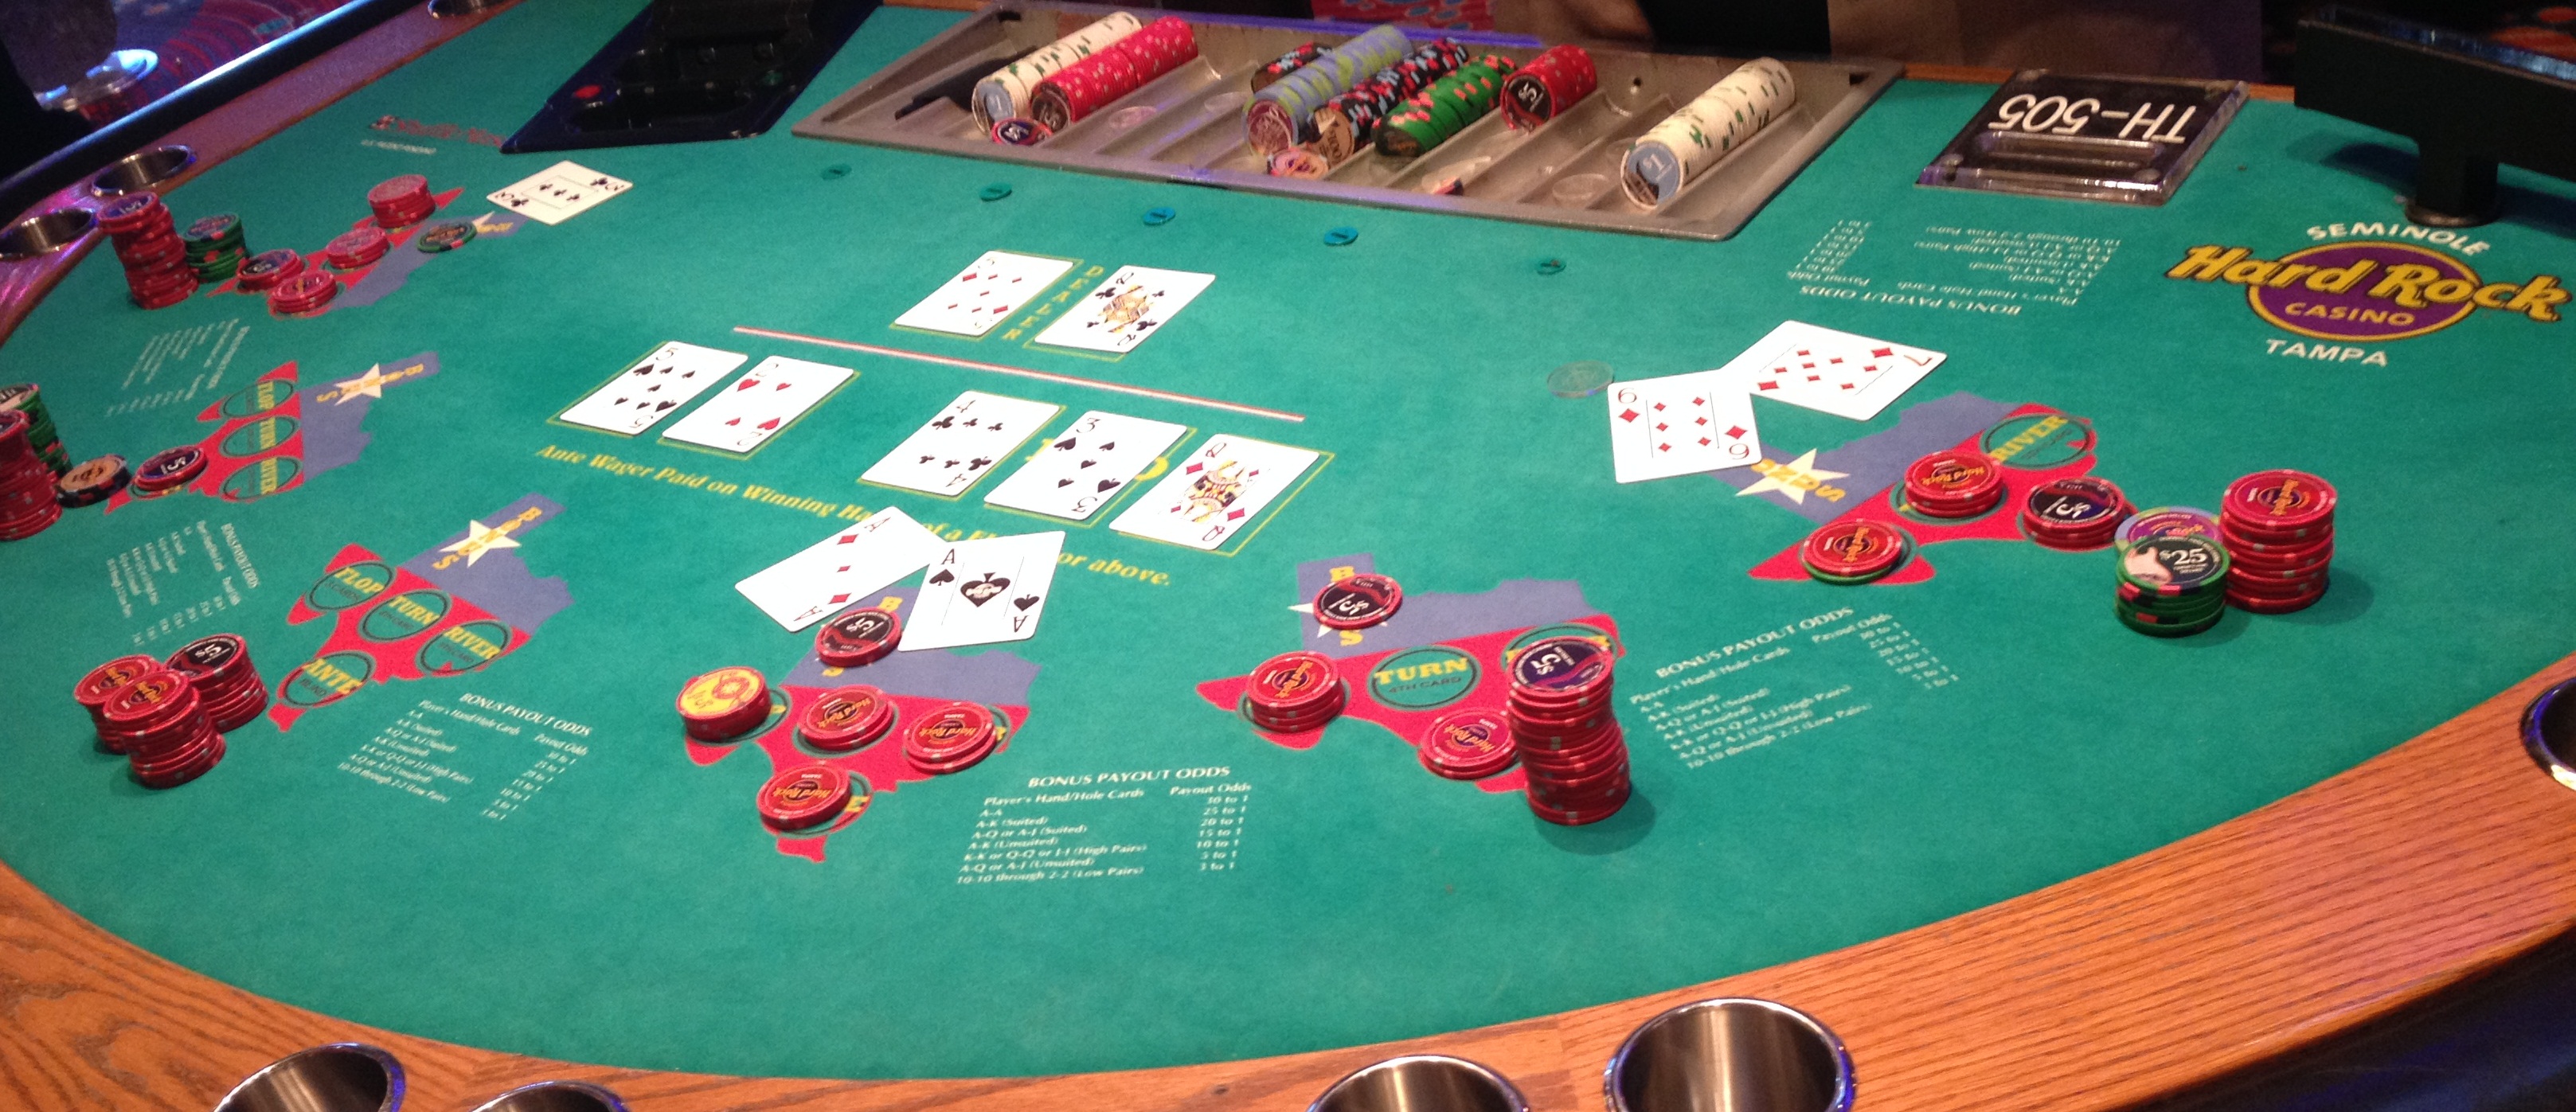 Poker texas holdem dealer rules how to play